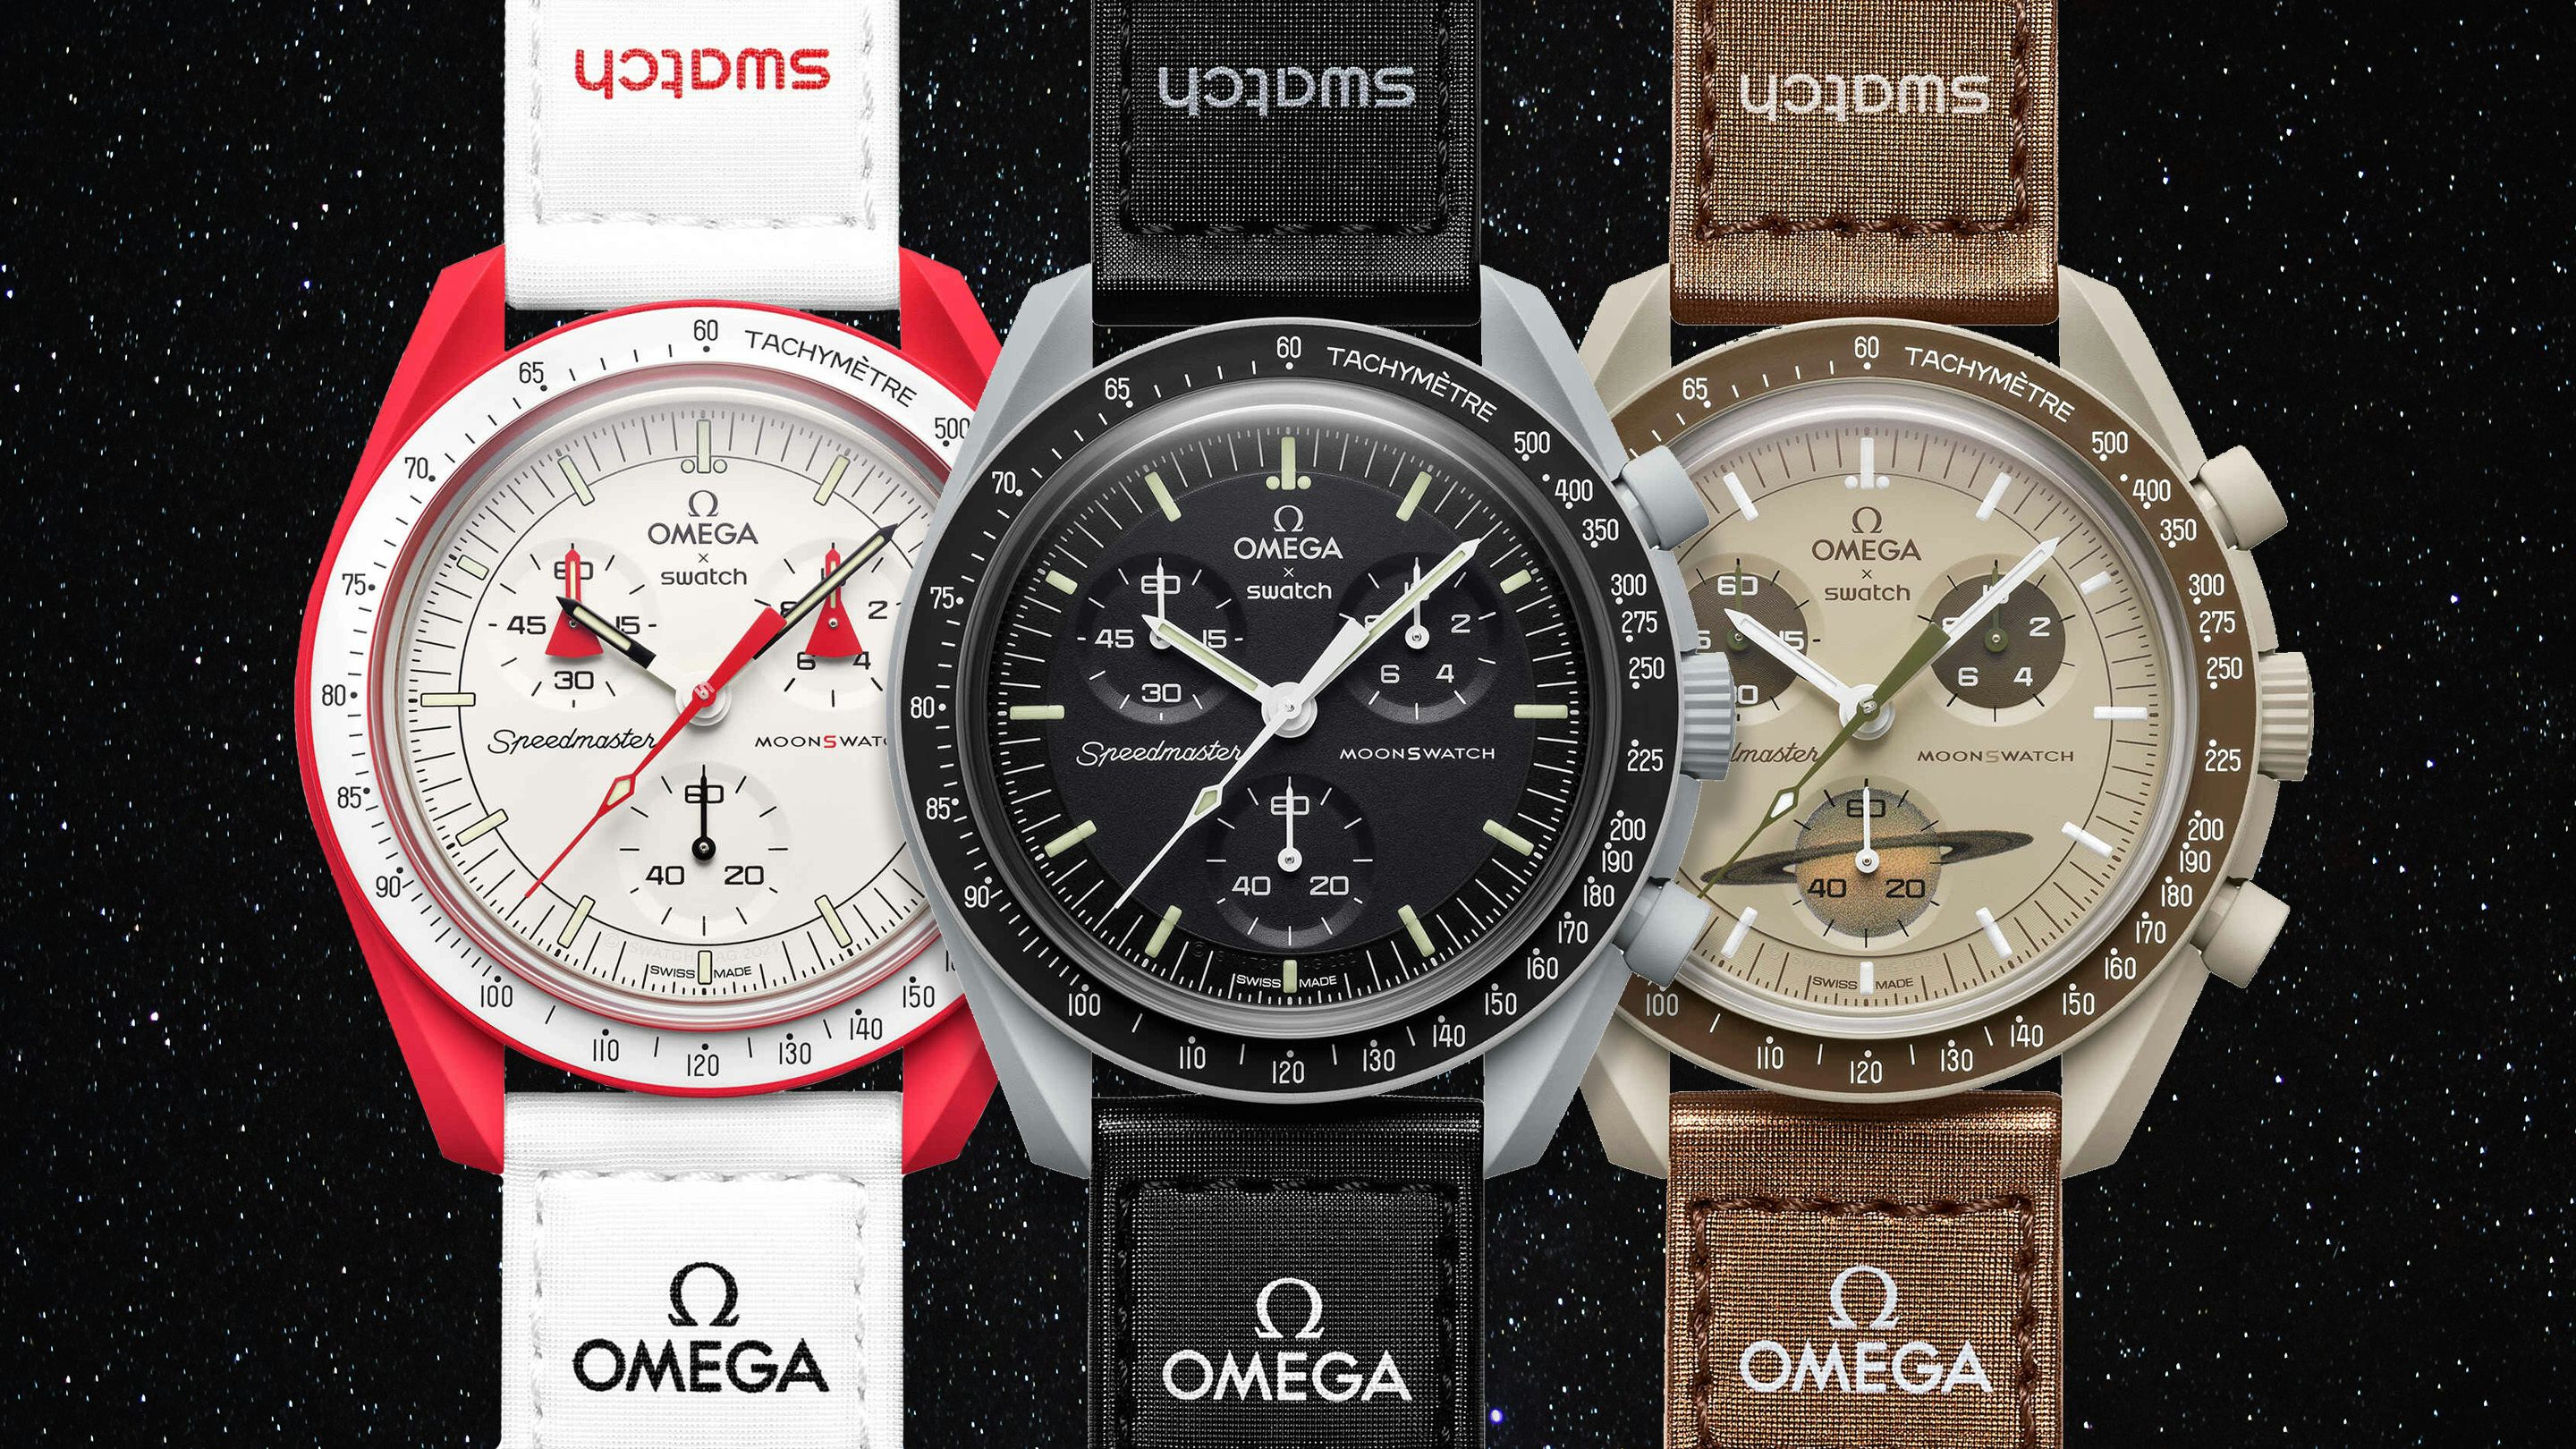 Moonwatch swatch omega Swatch X